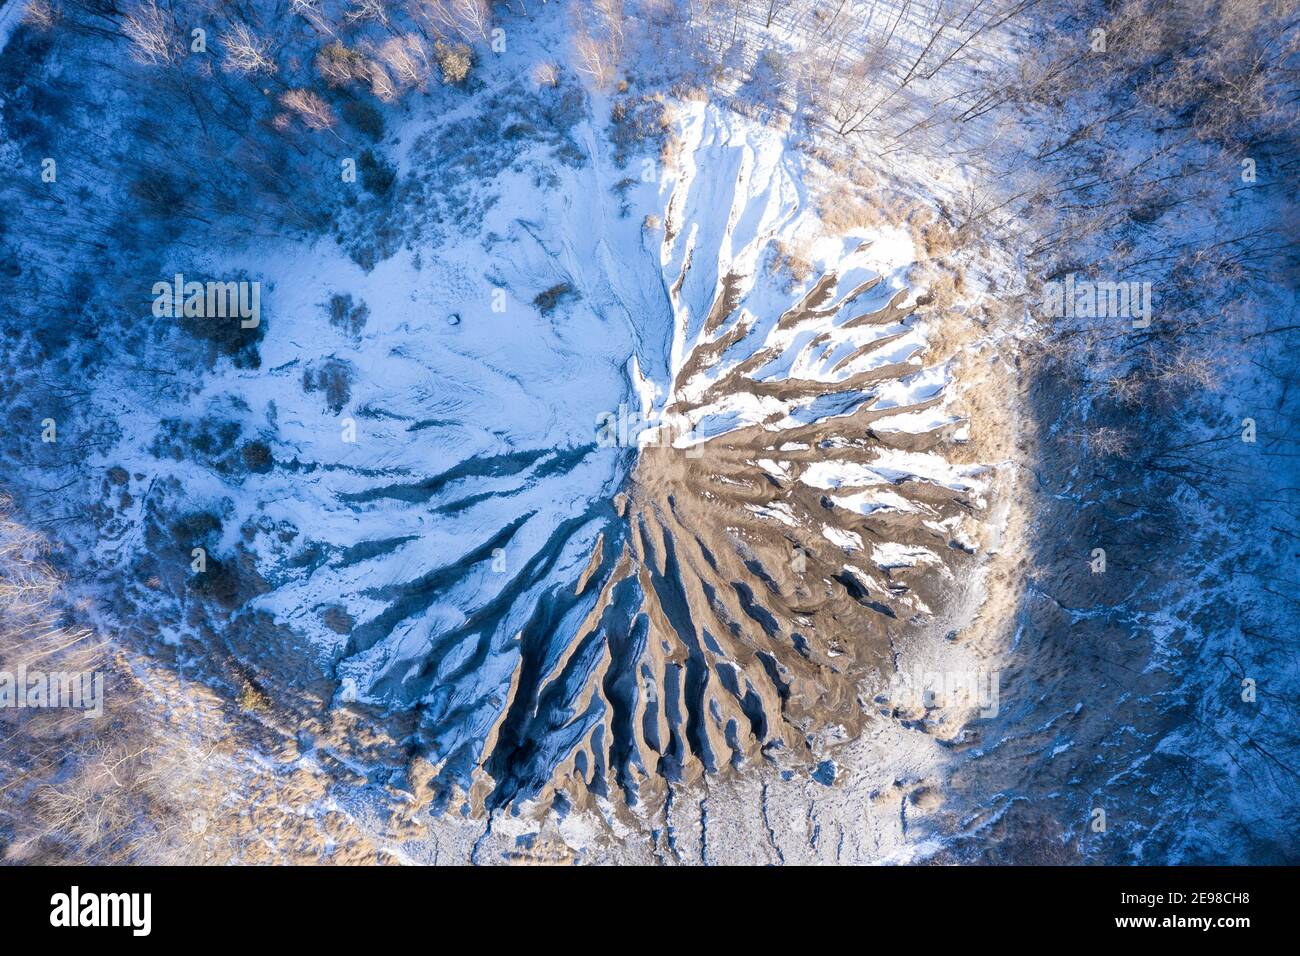 Amazing aerial  view of abandoned slag heap covered by snow and grass, winter landscape. Hungarian name is zagyvarónai salakkúp. Stock Photo